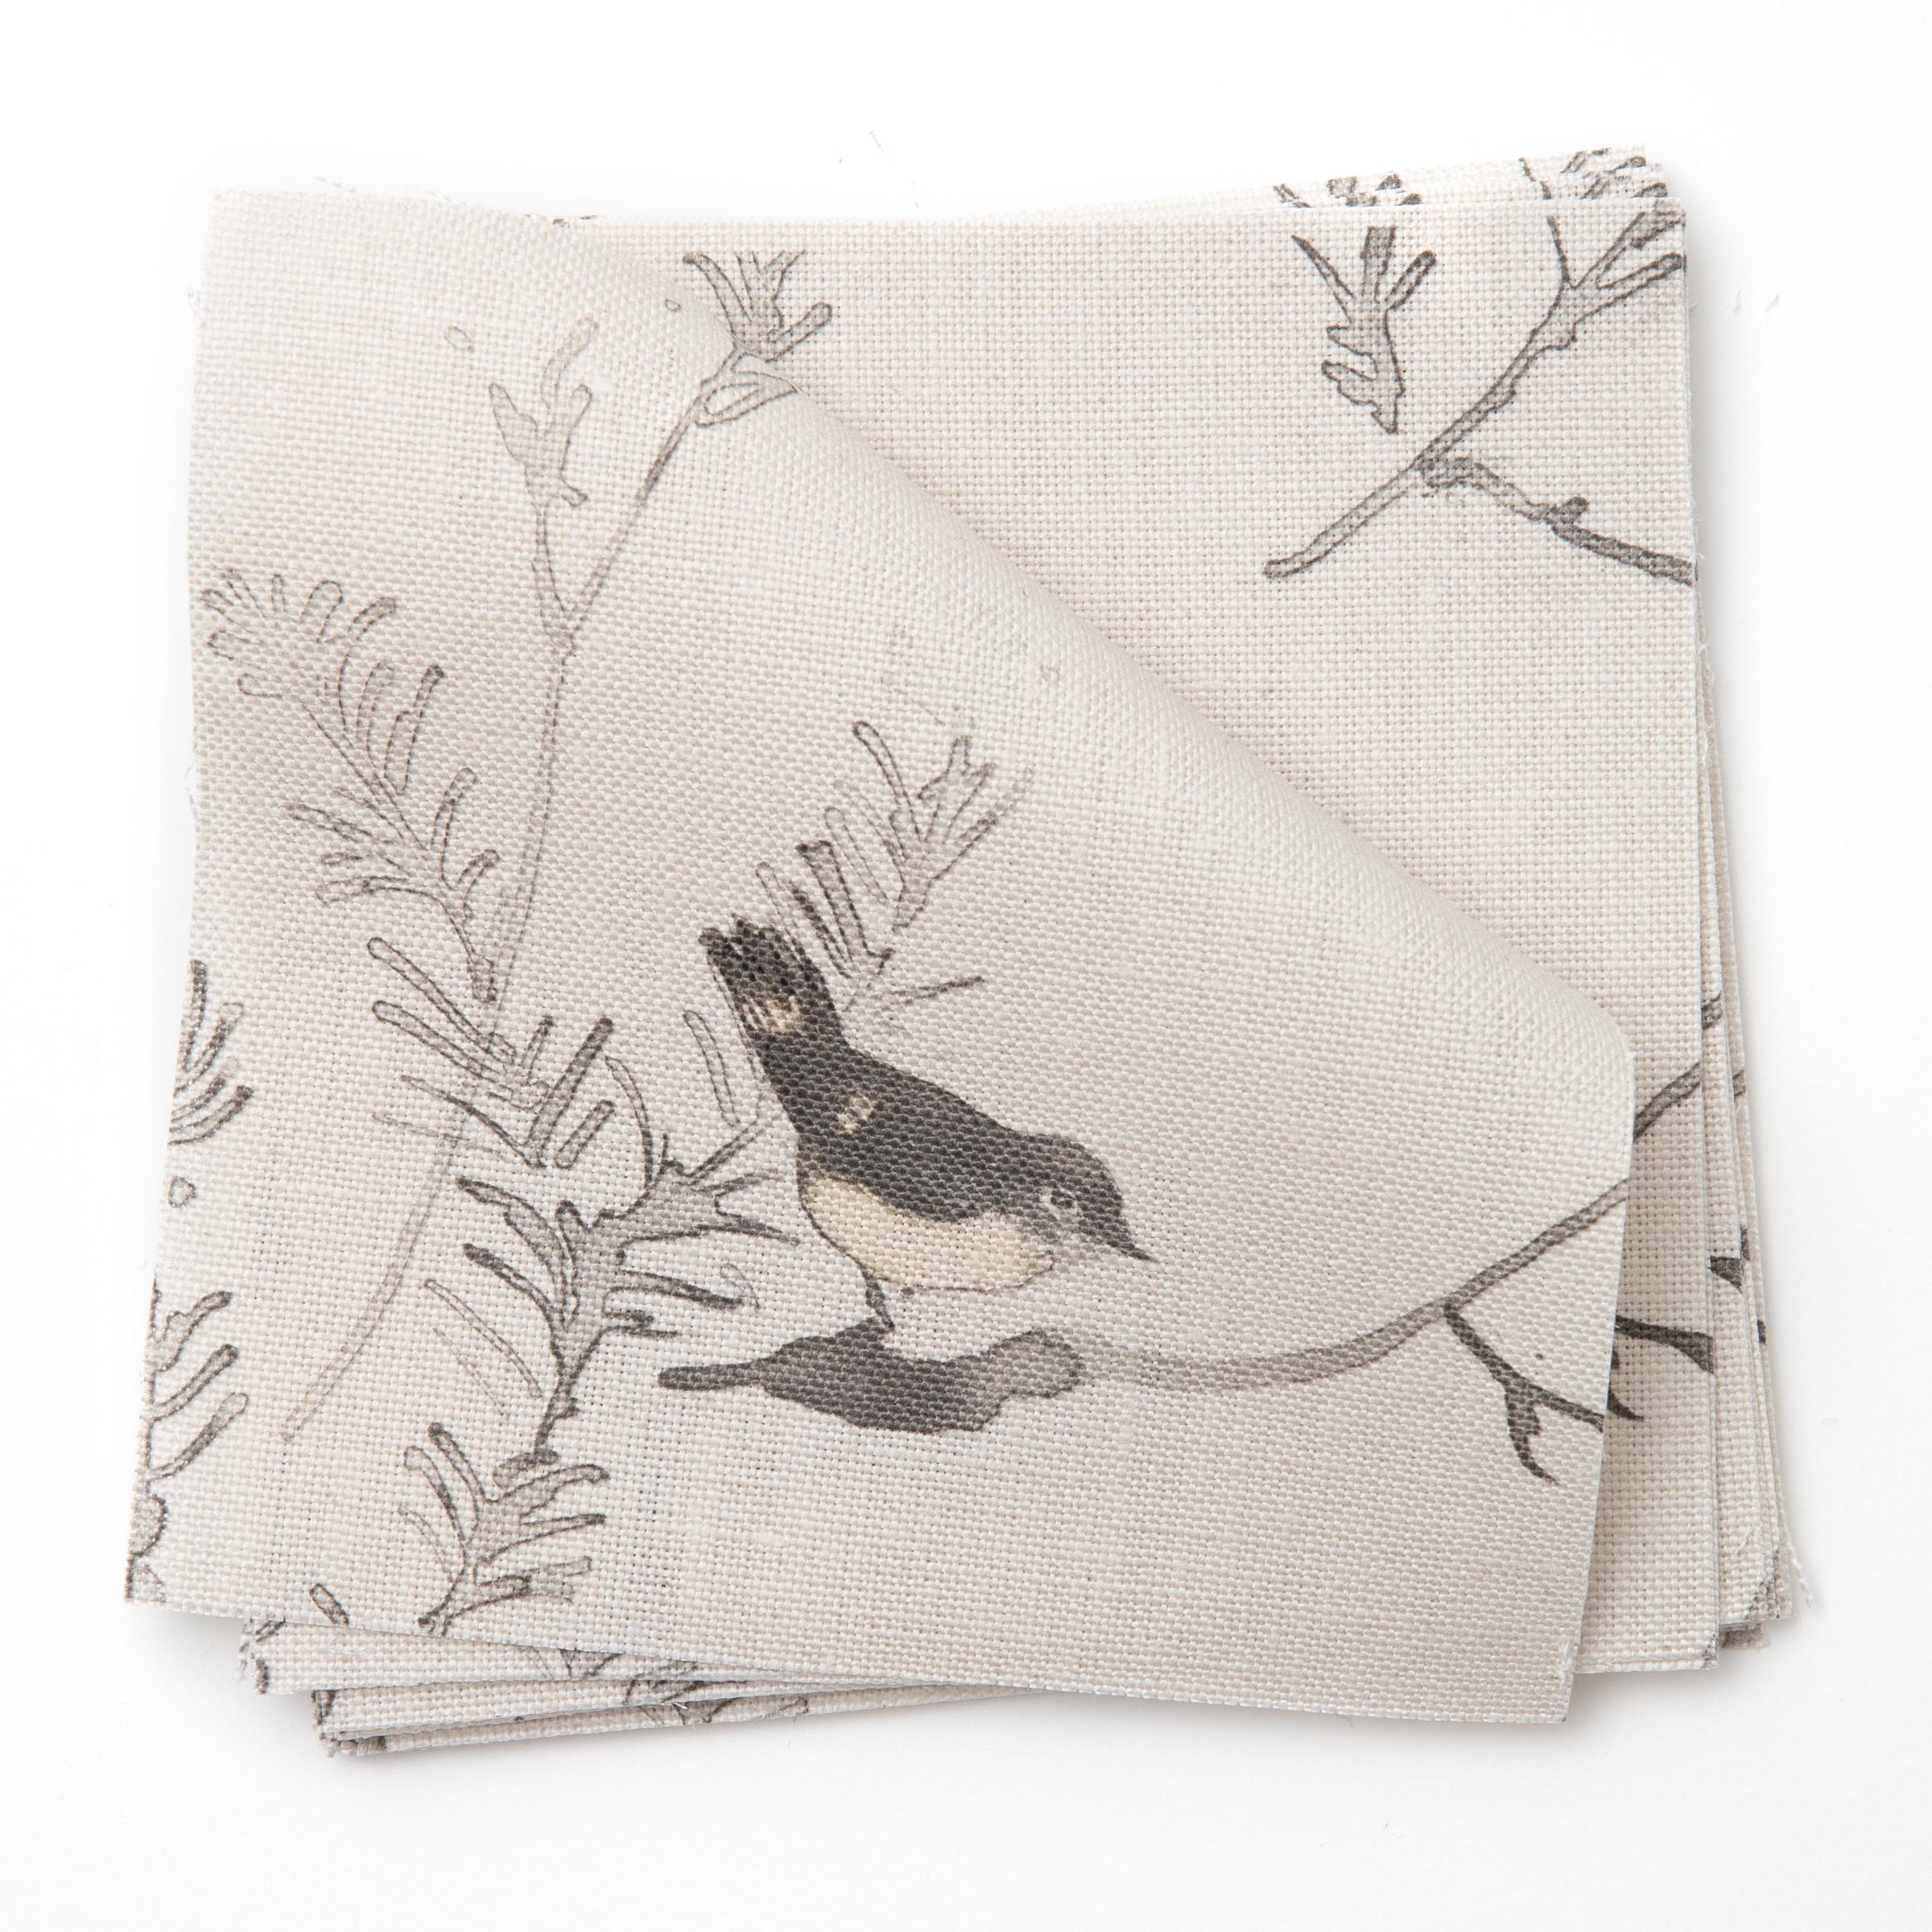 A stack of fabric swatches in a painterly bird and branch pattern in shades of gray on a greige field.